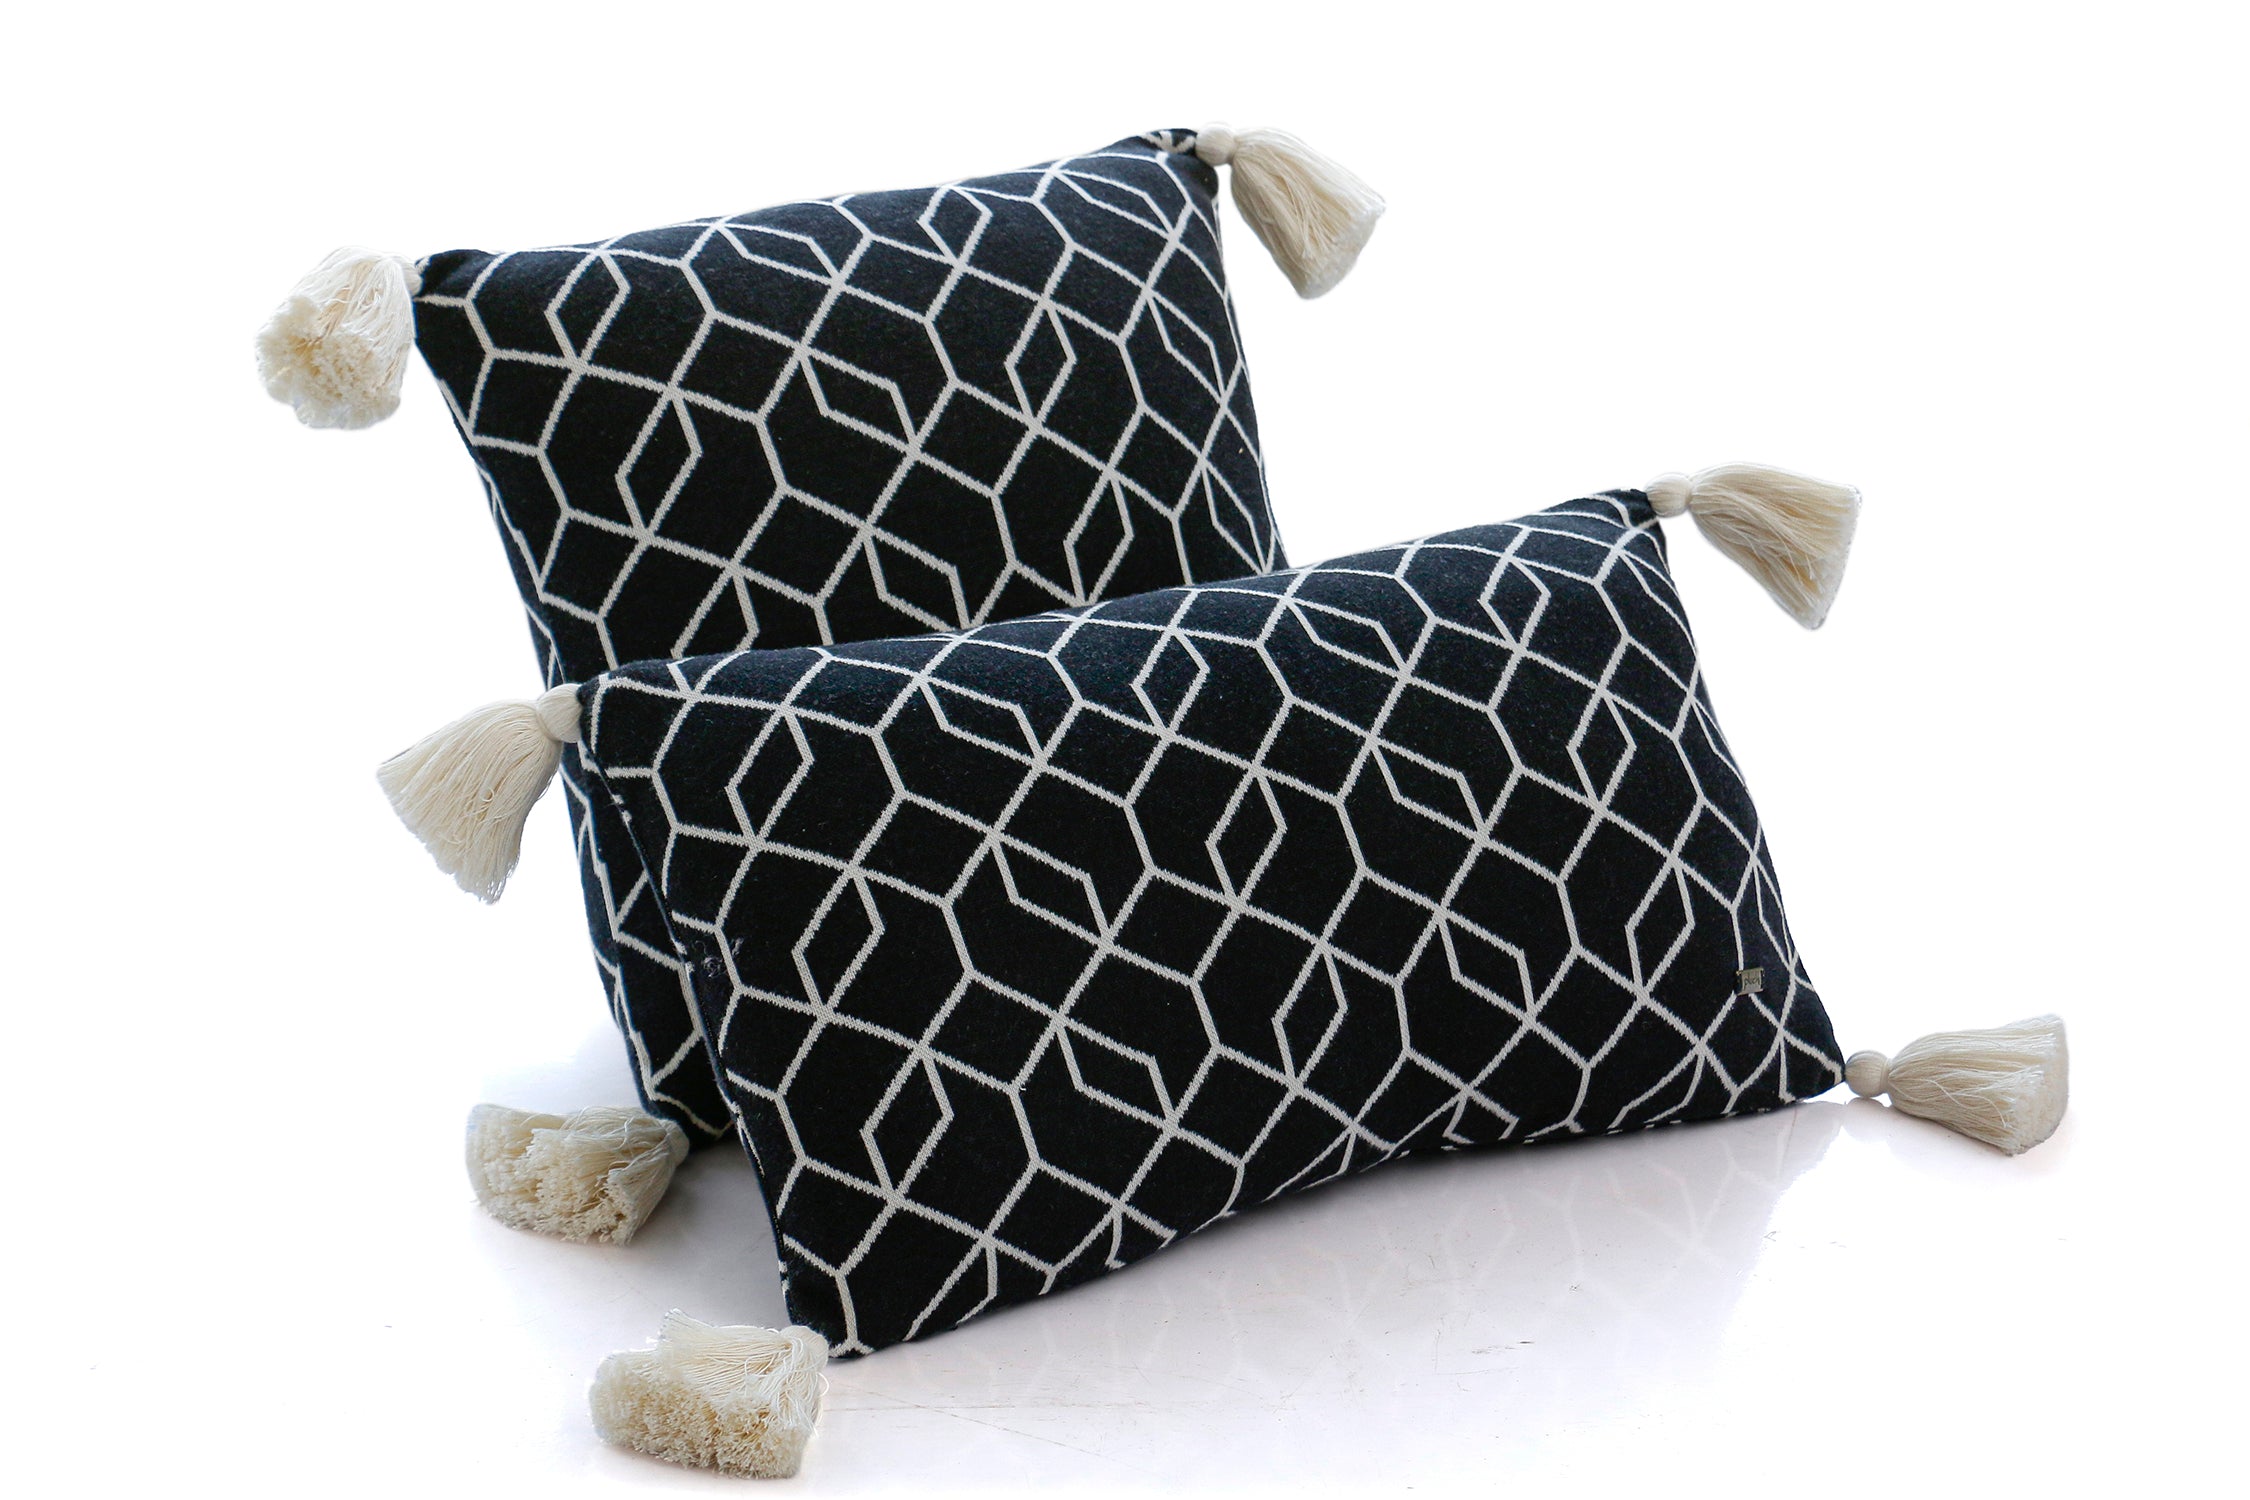 Trellis - Cotton Knitted Decorative Cushion Cover  (Black &amp; Natural)